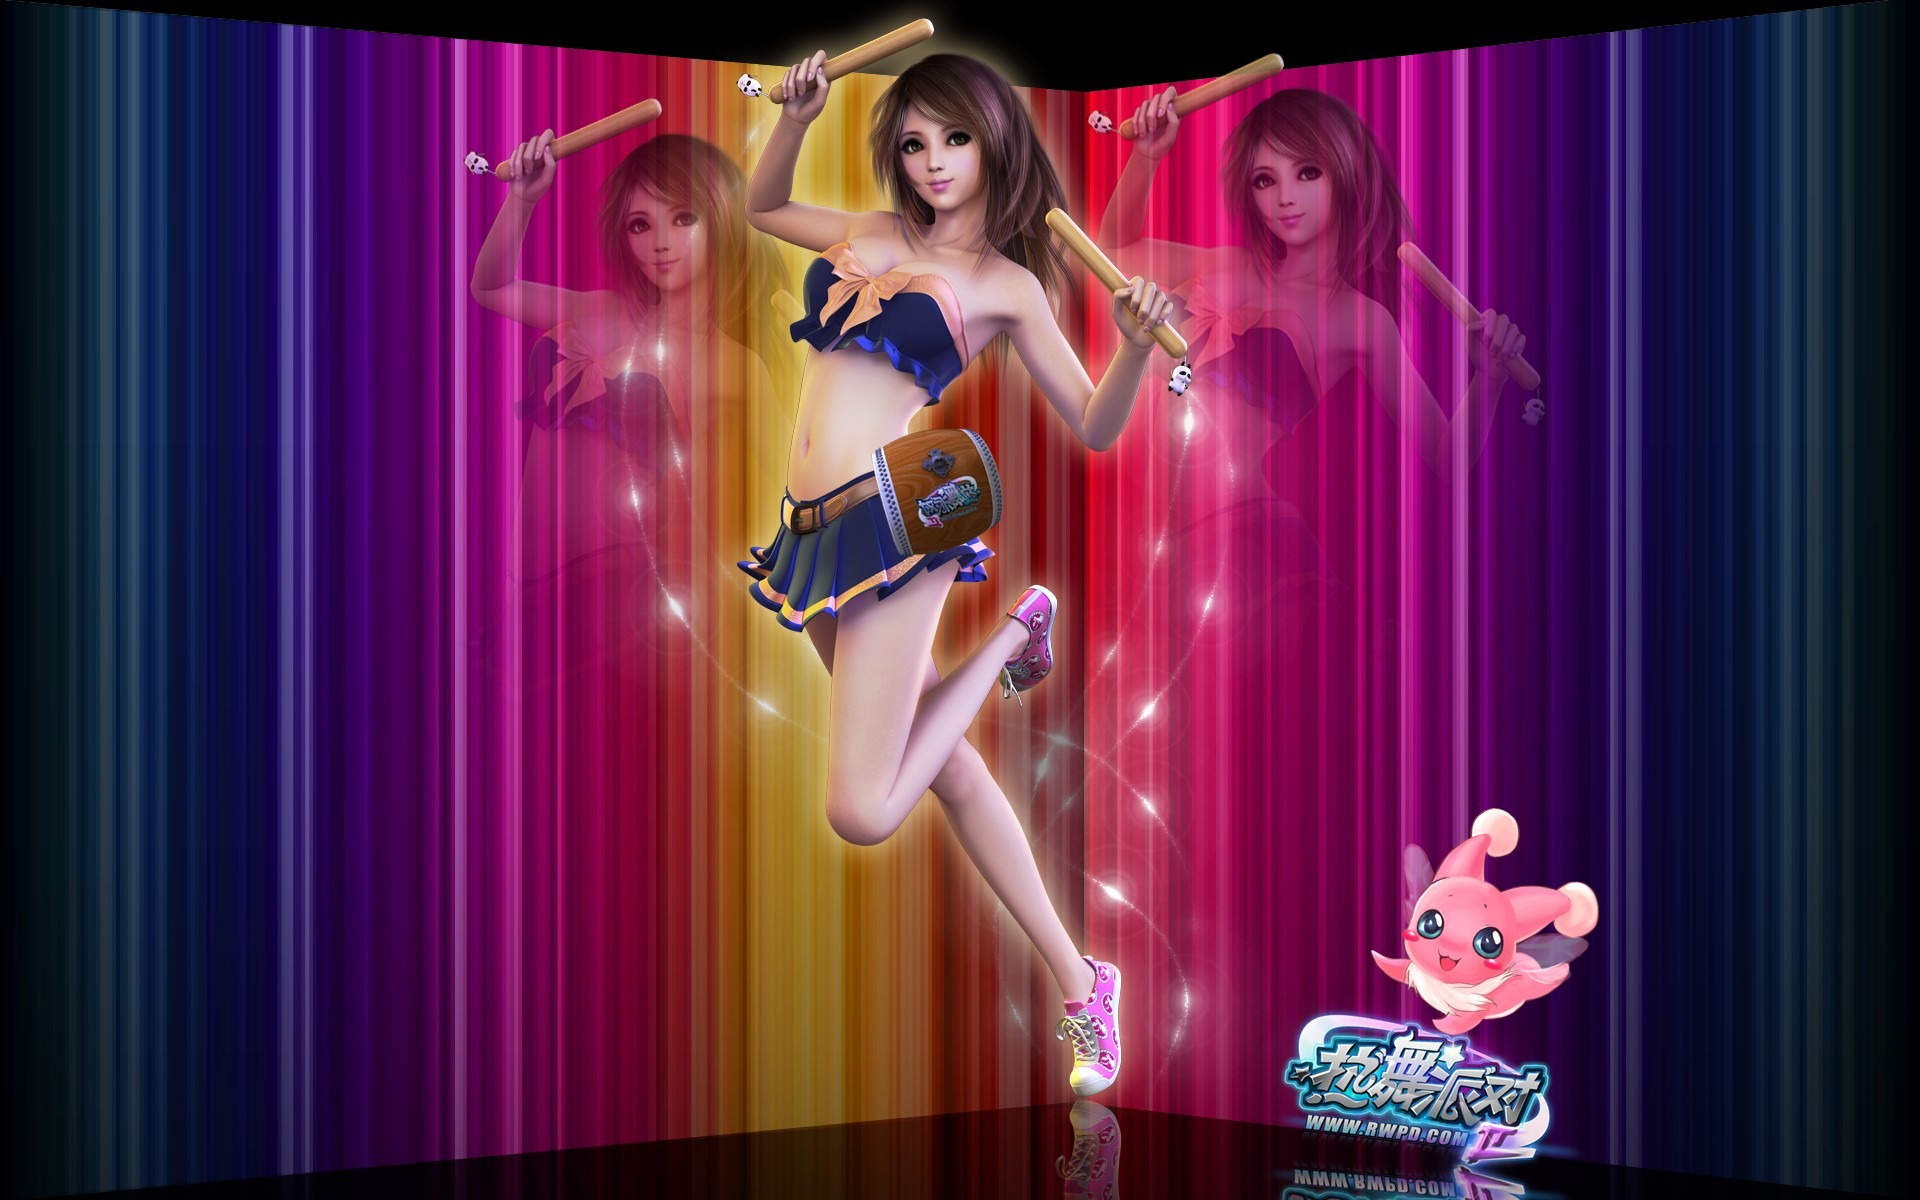 Online game Hot Dance Party II official wallpapers #18 - 1920x1200